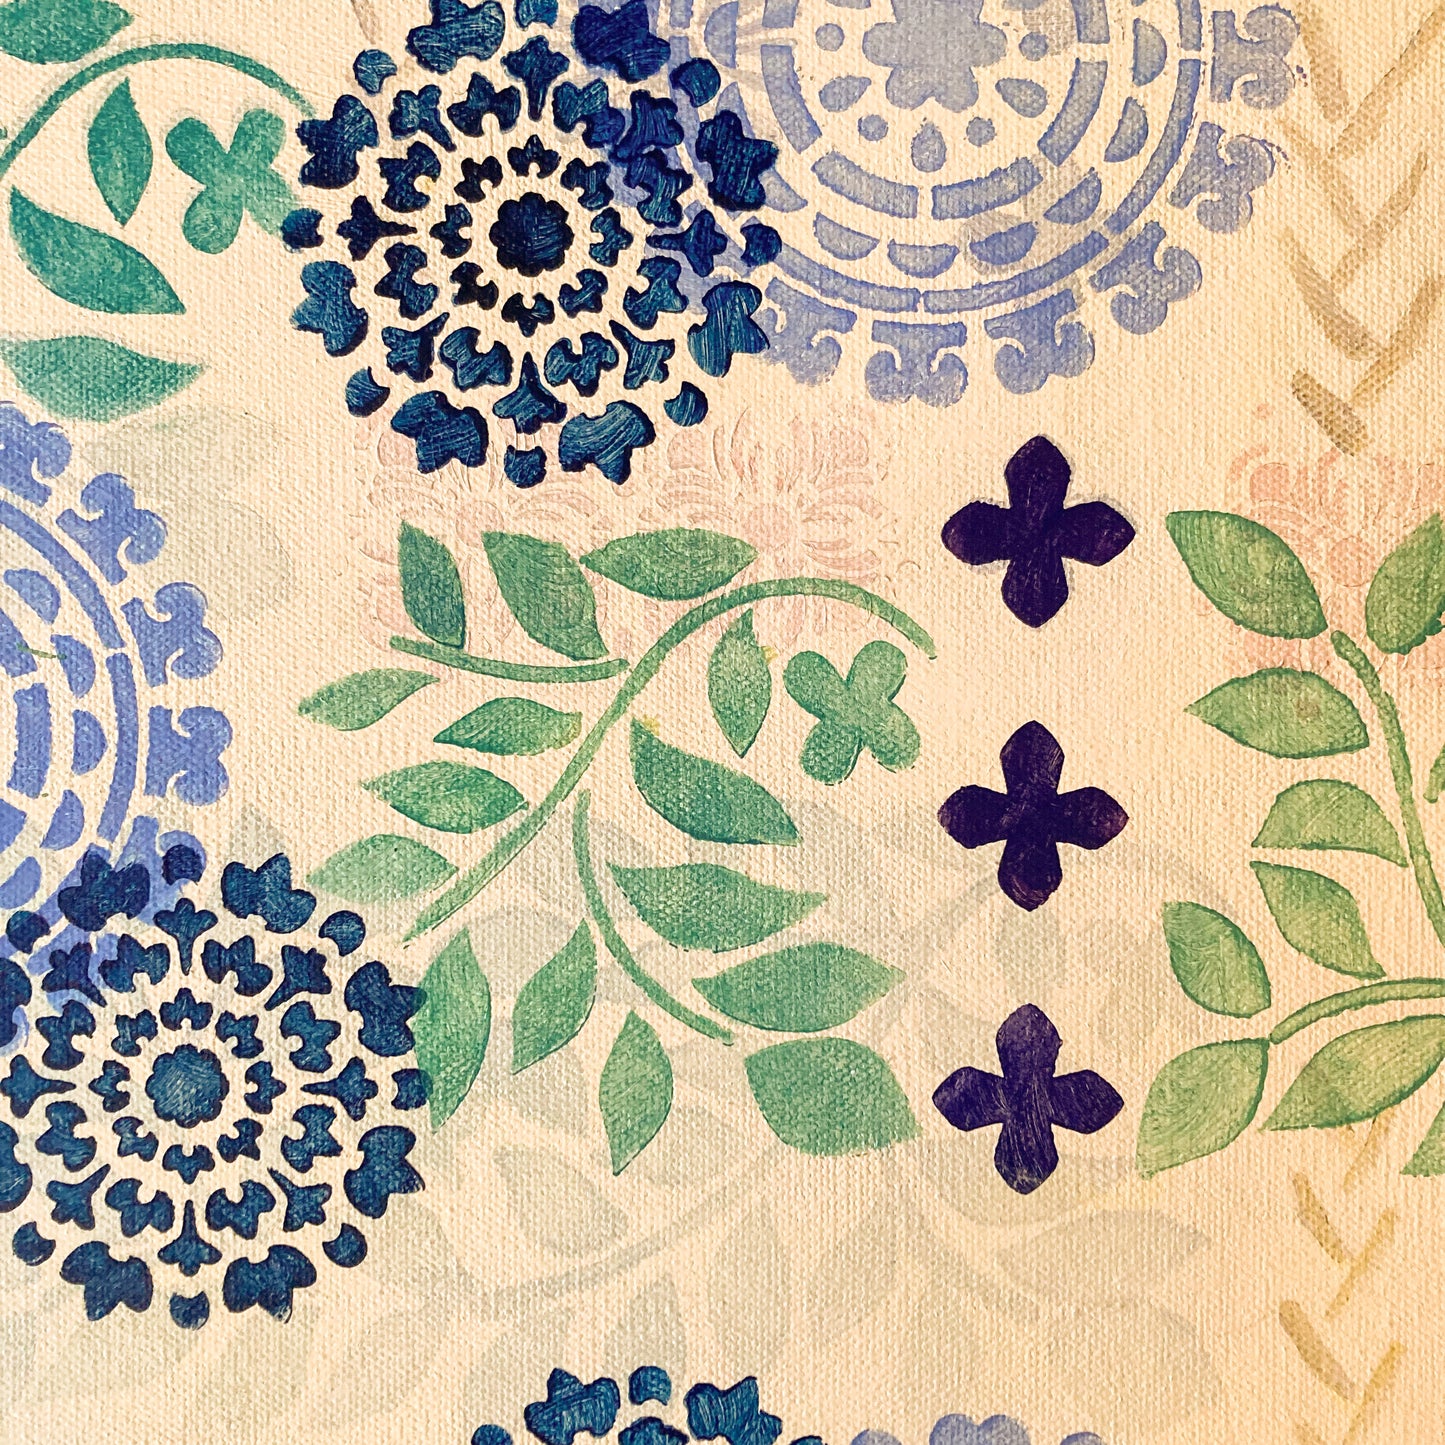 detail view abstract acrylic painting on canvas cream background with green vines and purple and blue mandala shapes upbeat garden art